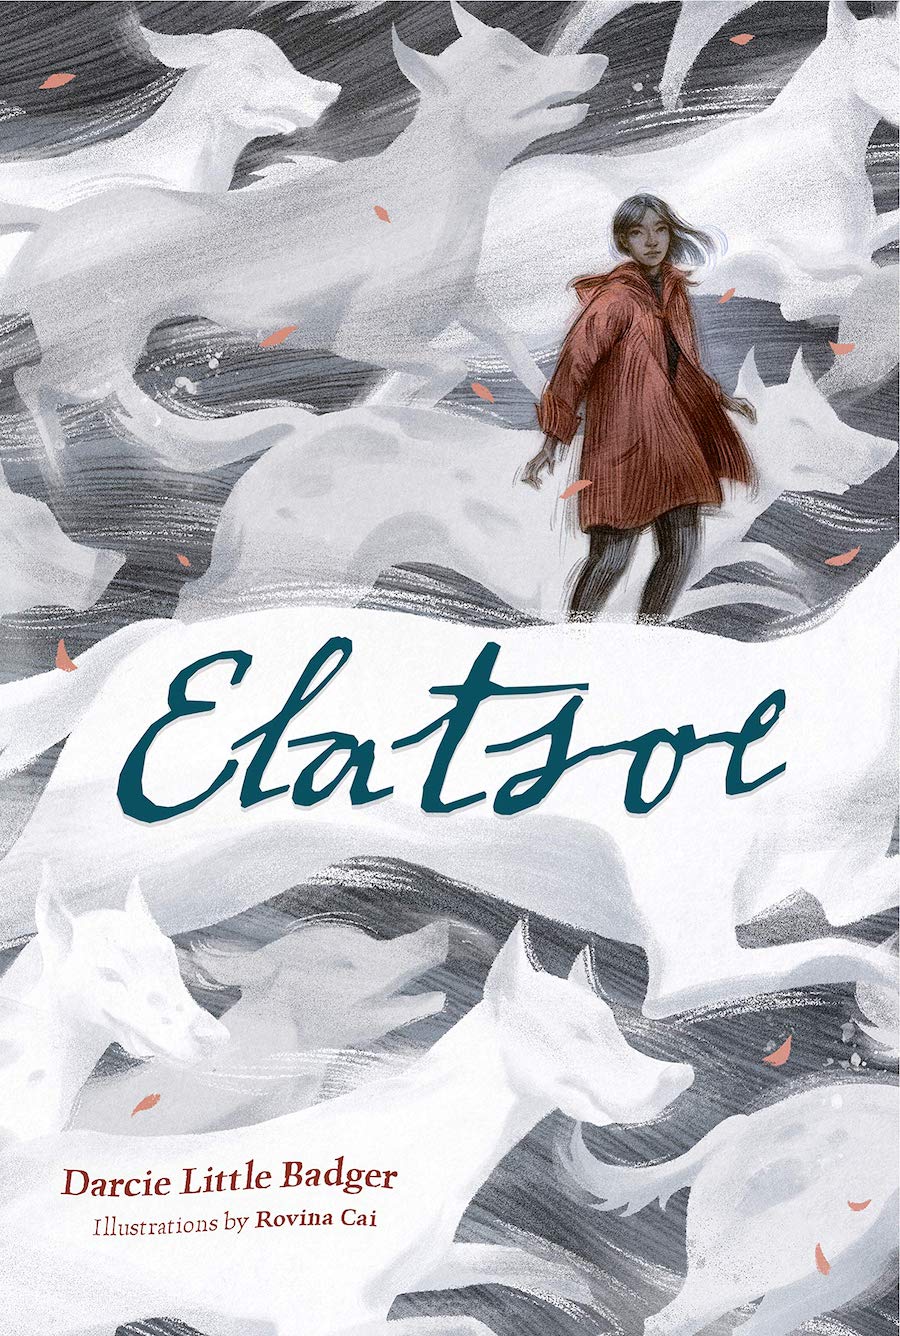 YA books with LGBTQ+ main characters: Elatsoe by Darcie Little Badger